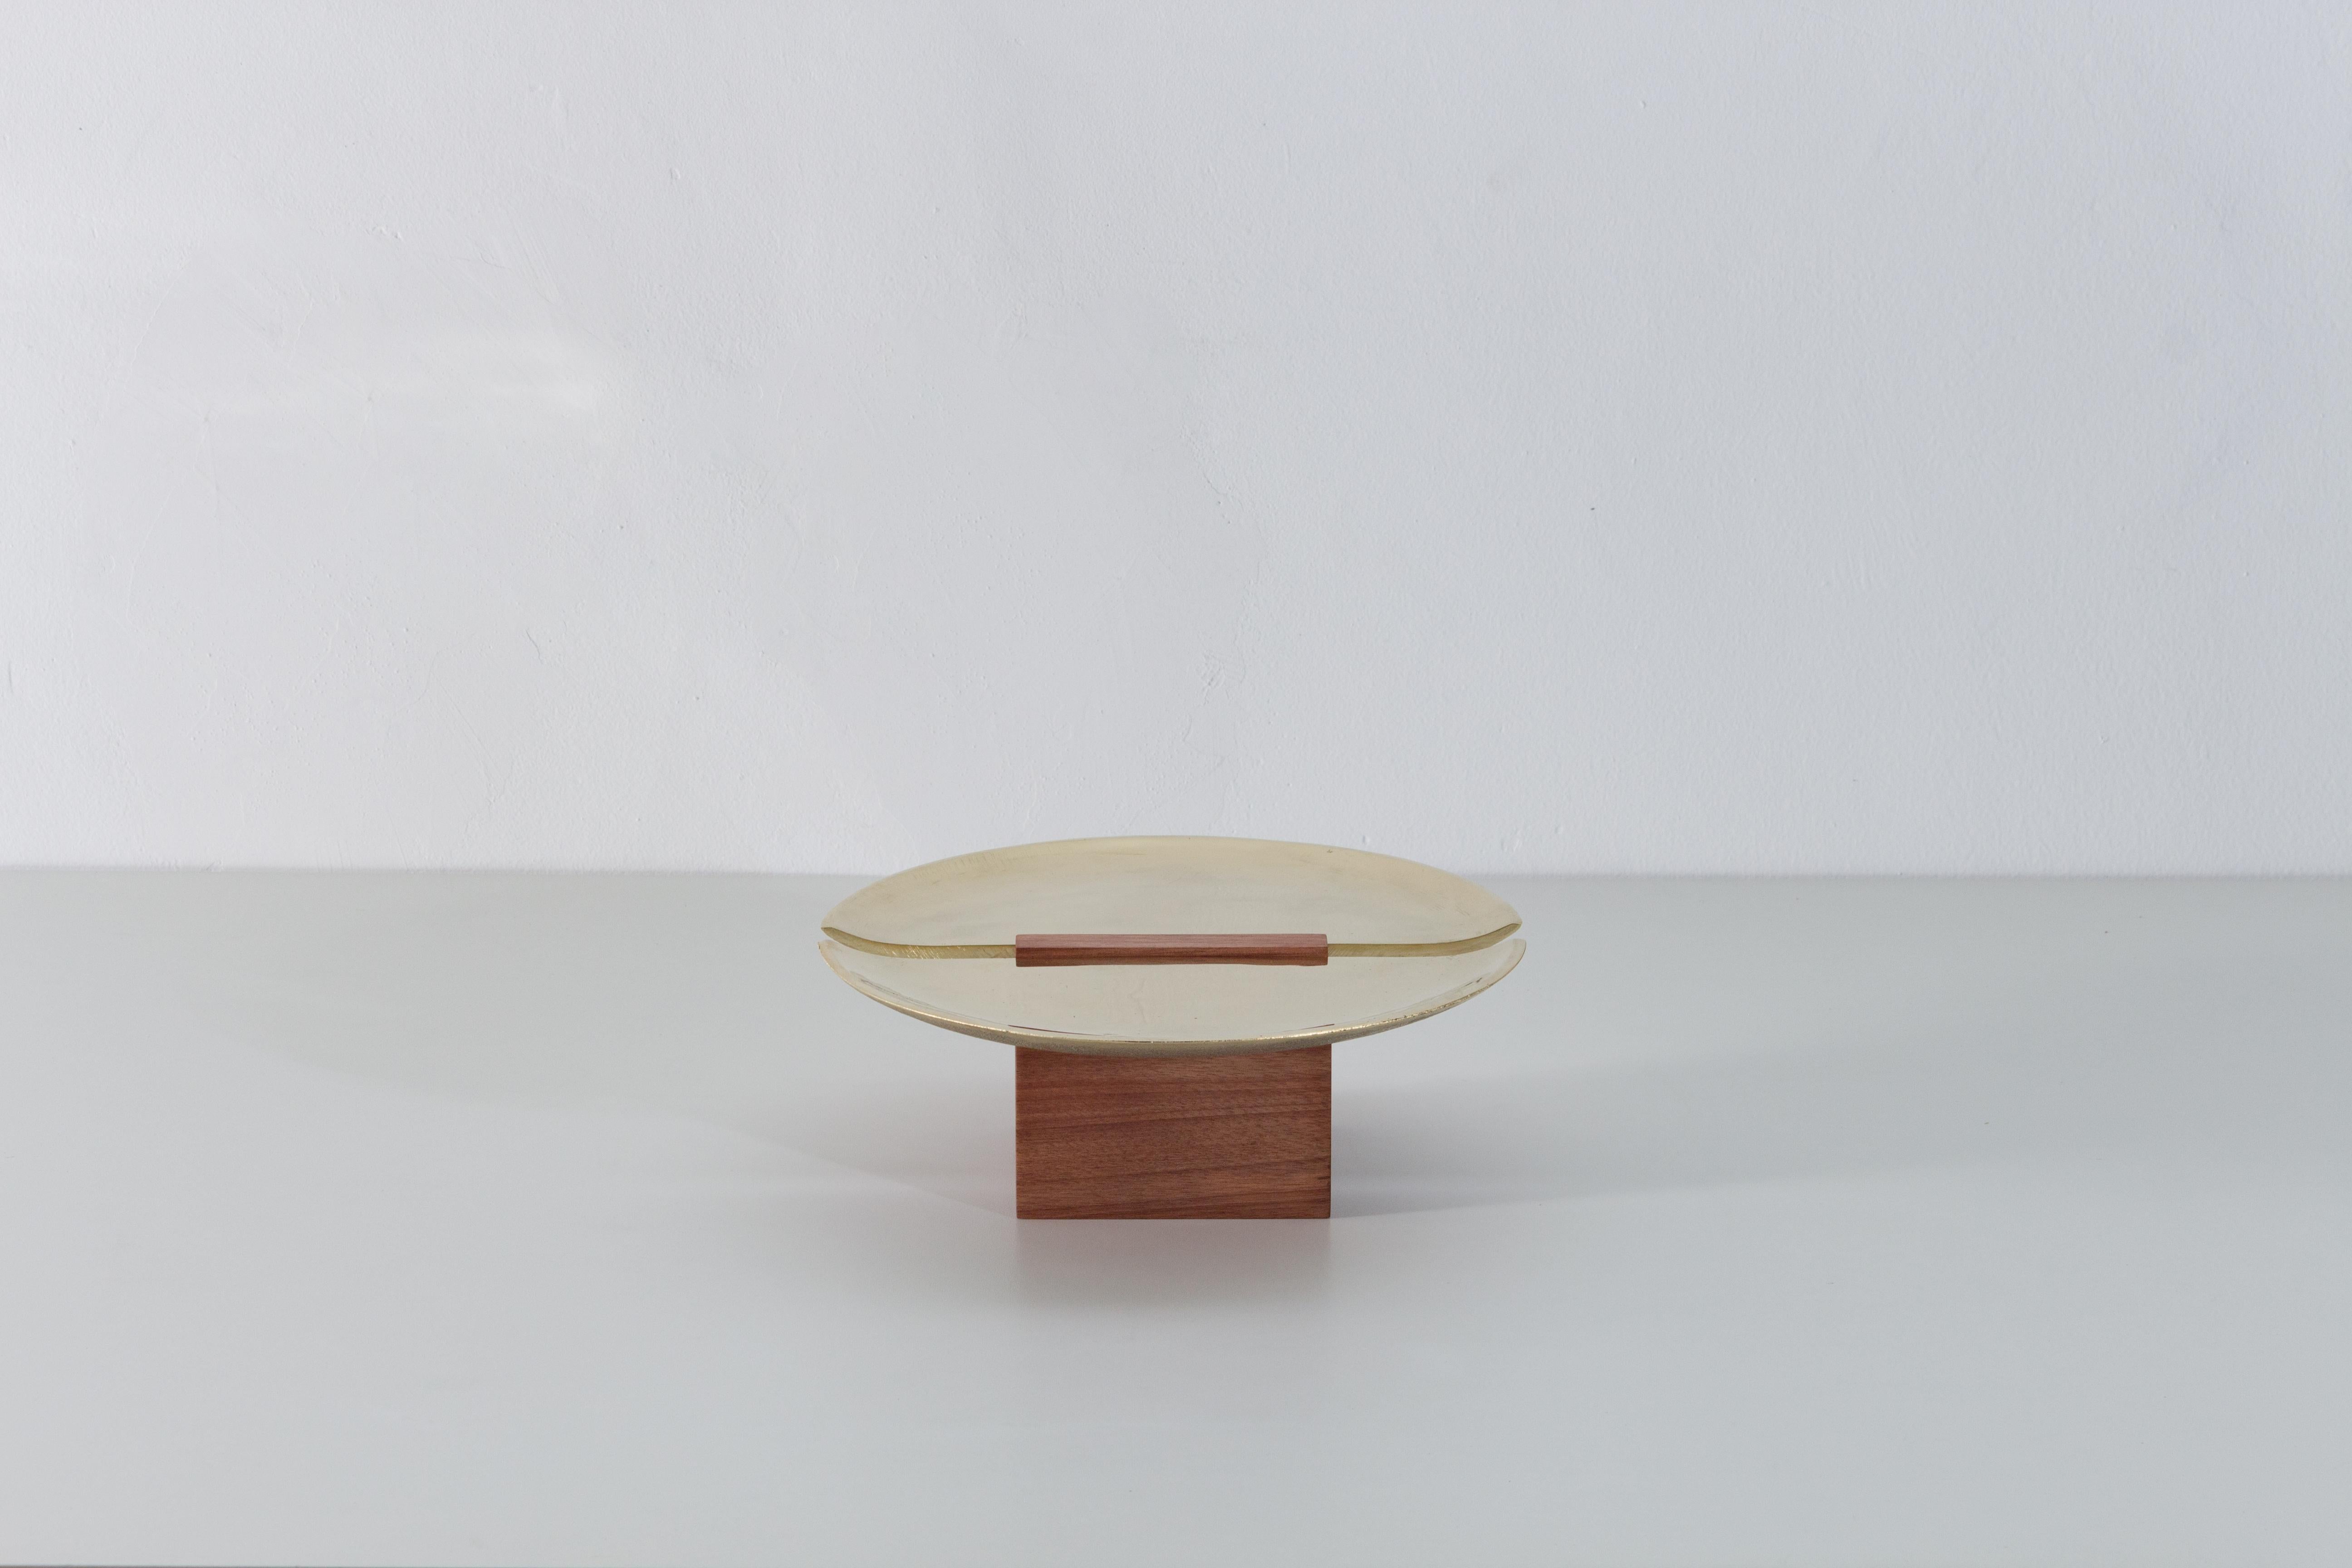 Winner of the 2023 EDIDA Brazil (Elle Deco International Design Awards) in the Objects Category.

Beira is a collection of centerpieces defined by geometric wood and metal elements. A cut divides the metal surface in two and, in between them, the